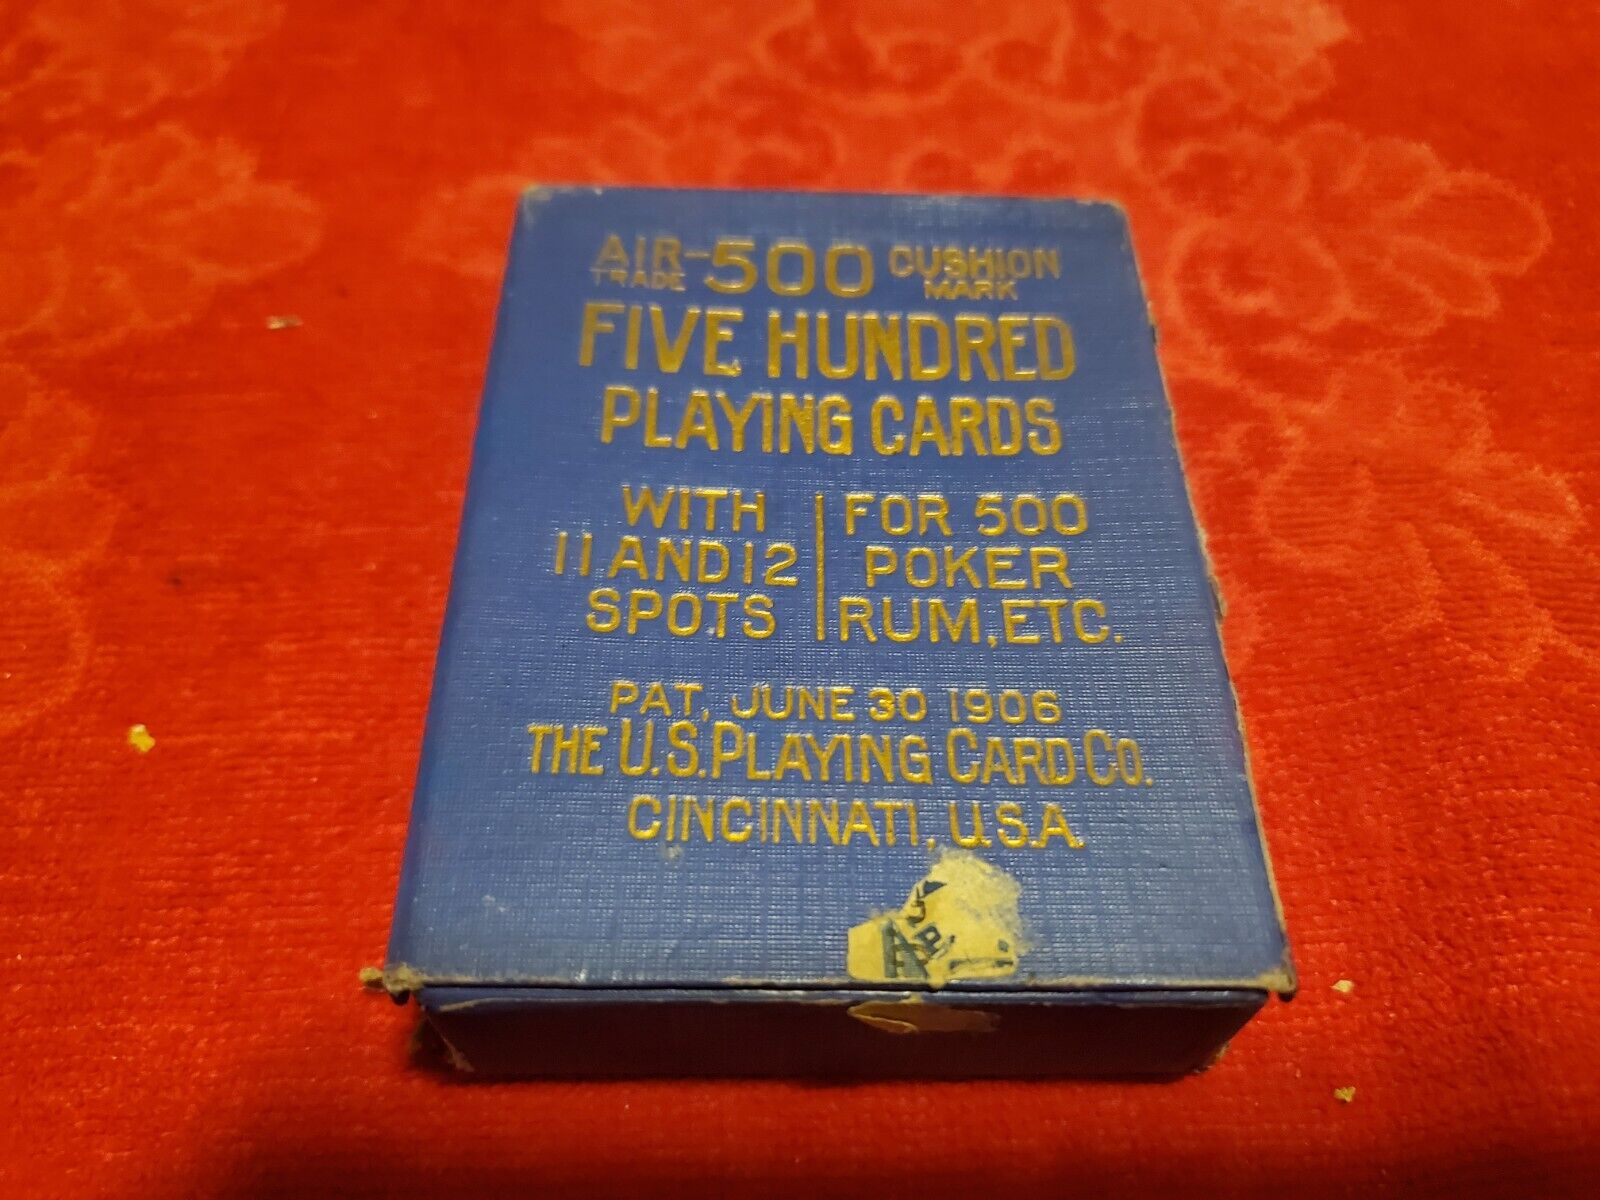 VINTAGE PLAYING CARD DECK AIR 500 FIVE HUNDRED WITH 11 AND 12 SPOT  1906